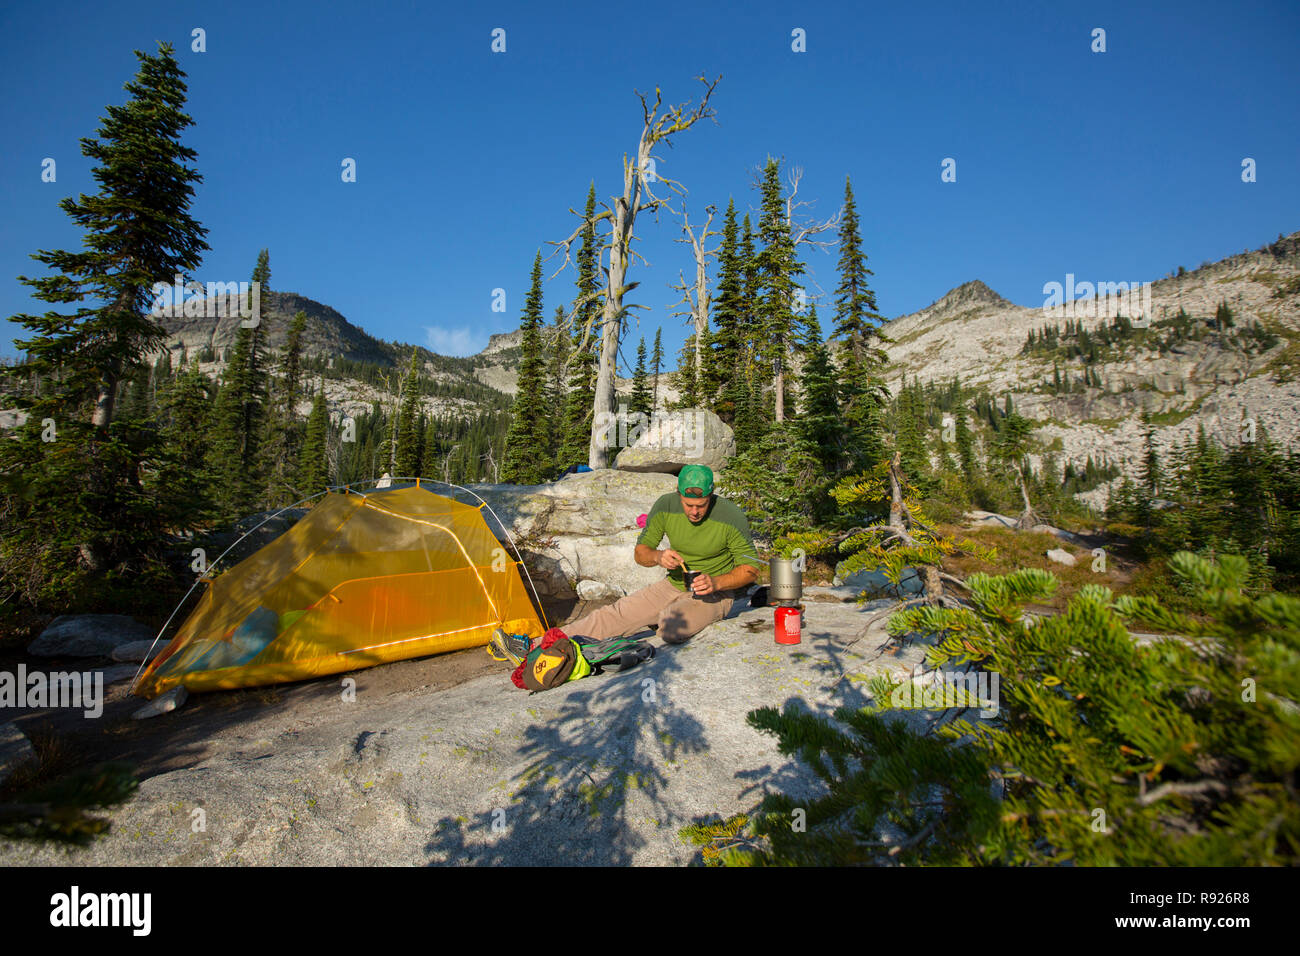 Distant view of a man making coffee near a camping tent, Selkirk Mountains, Sandpoint, Idaho, USA Stock Photo